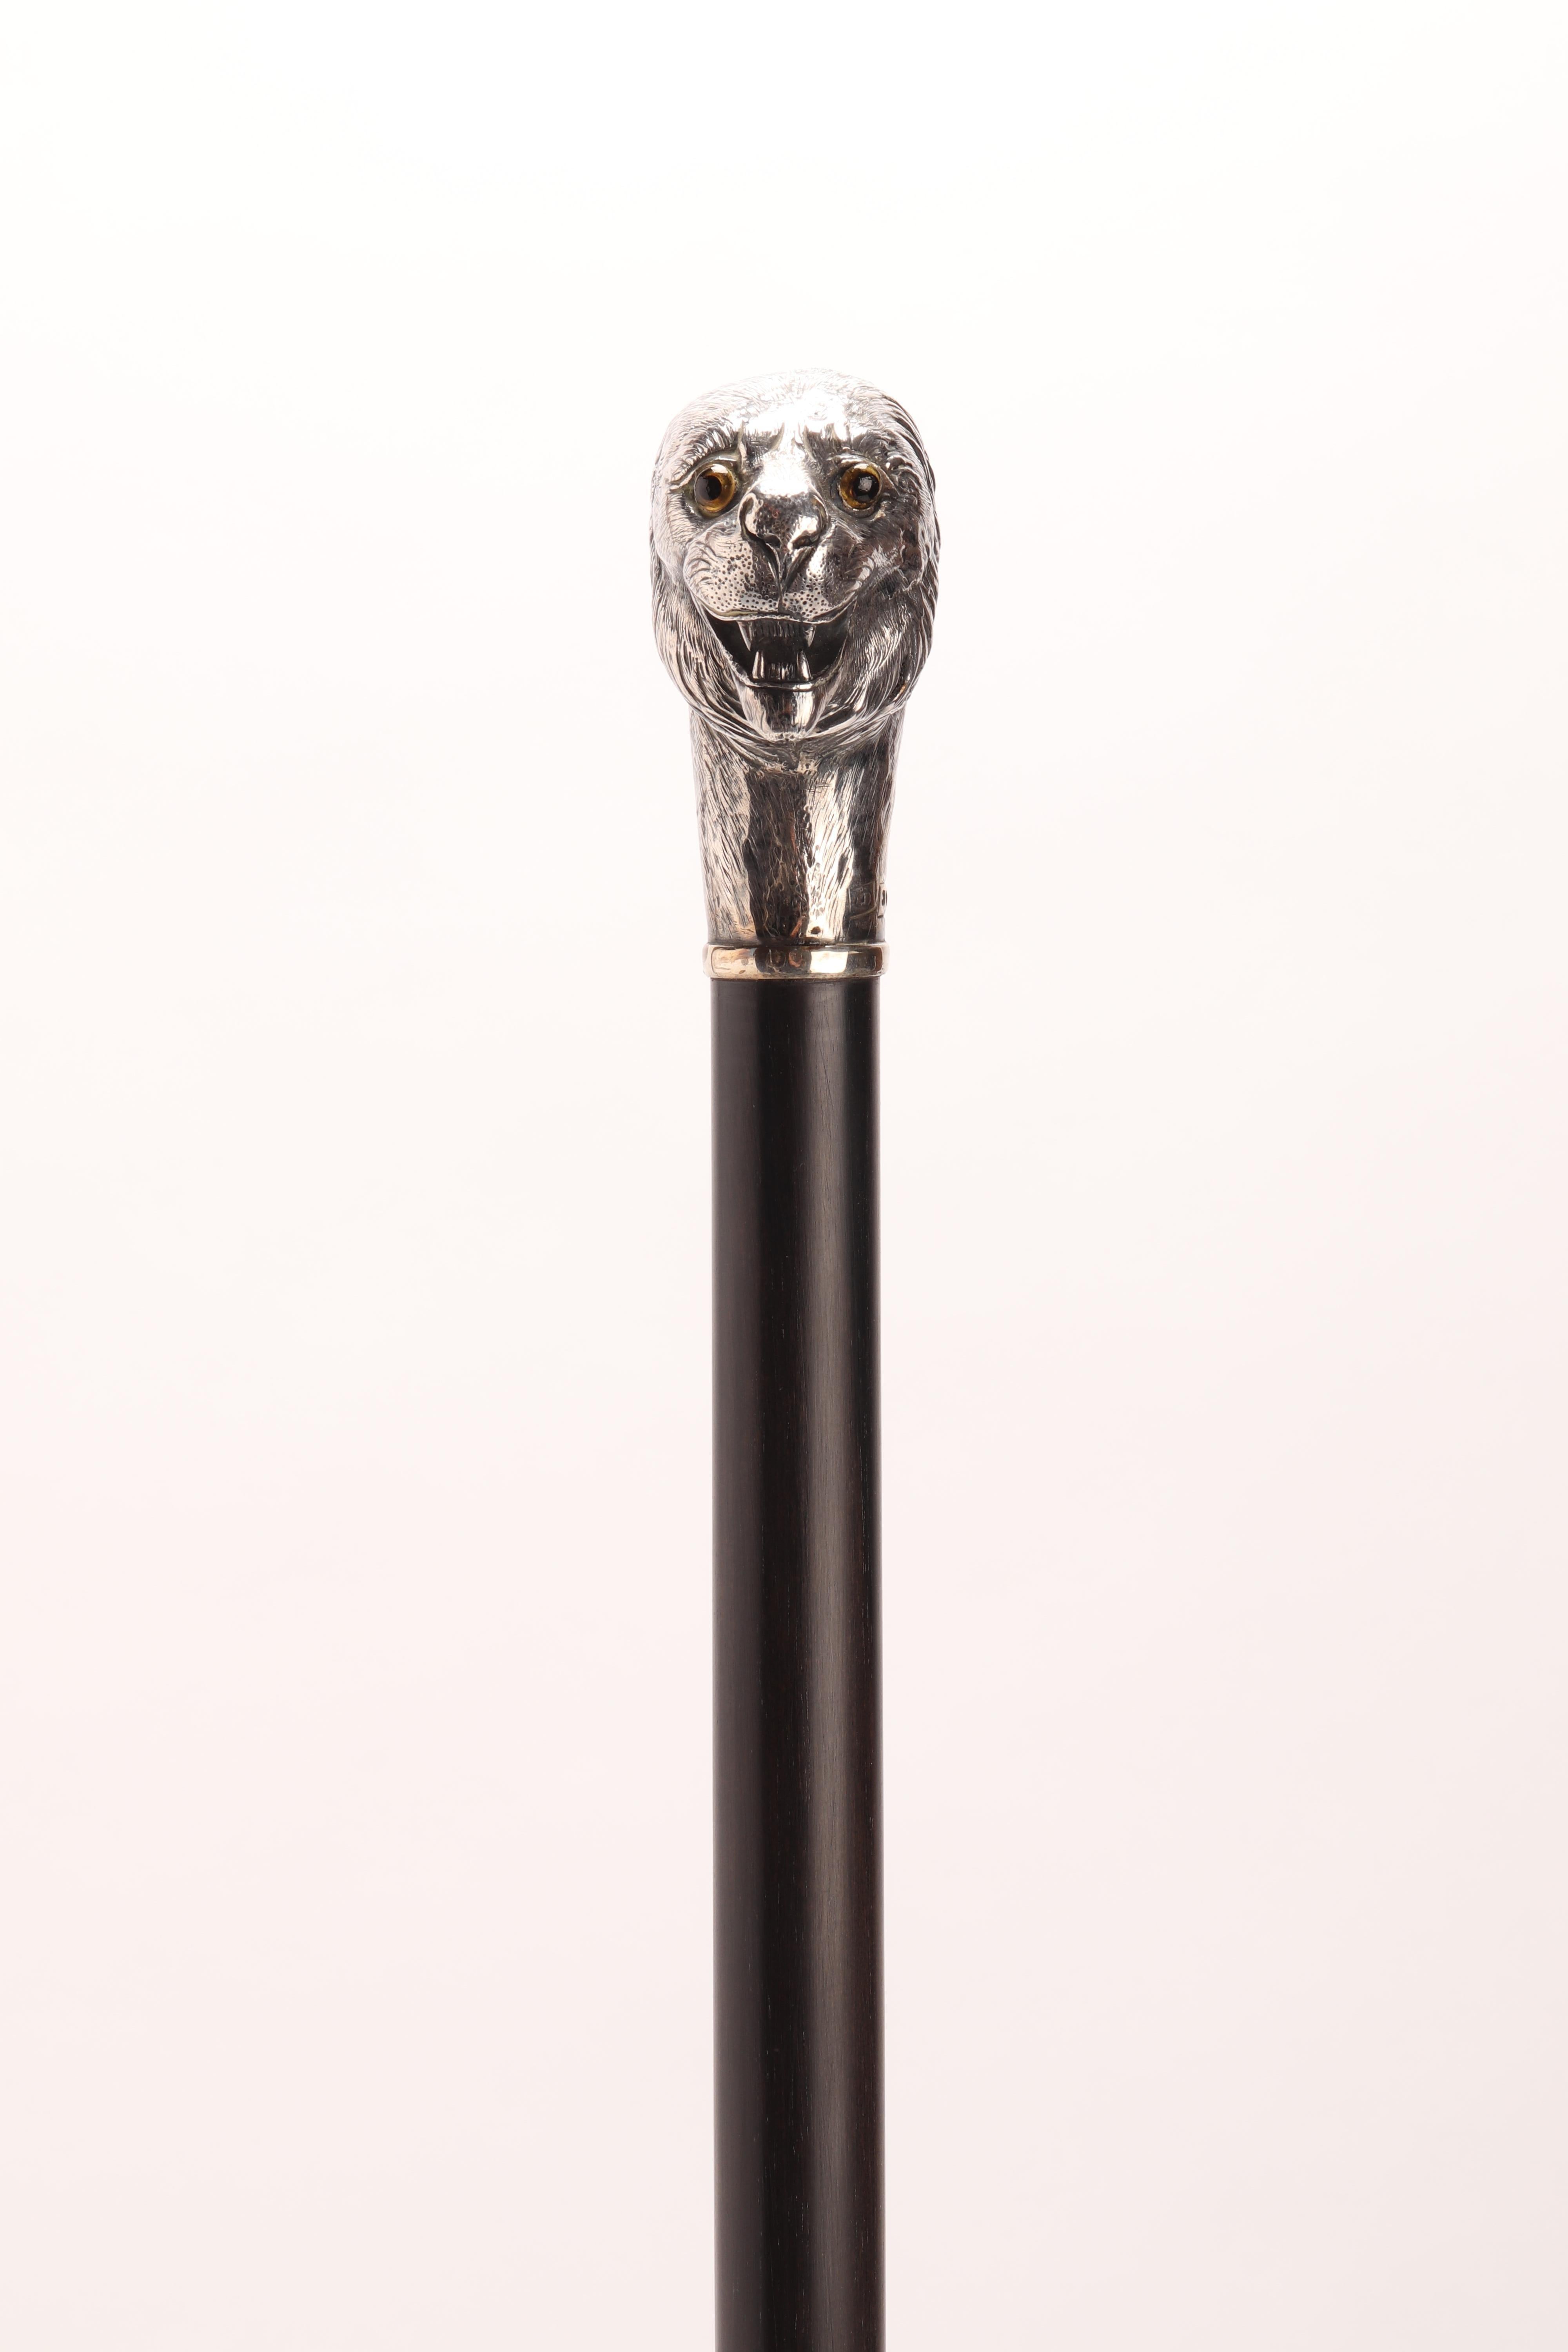 Early 20th Century Silver Walking Stick with a Lion, London, 1900